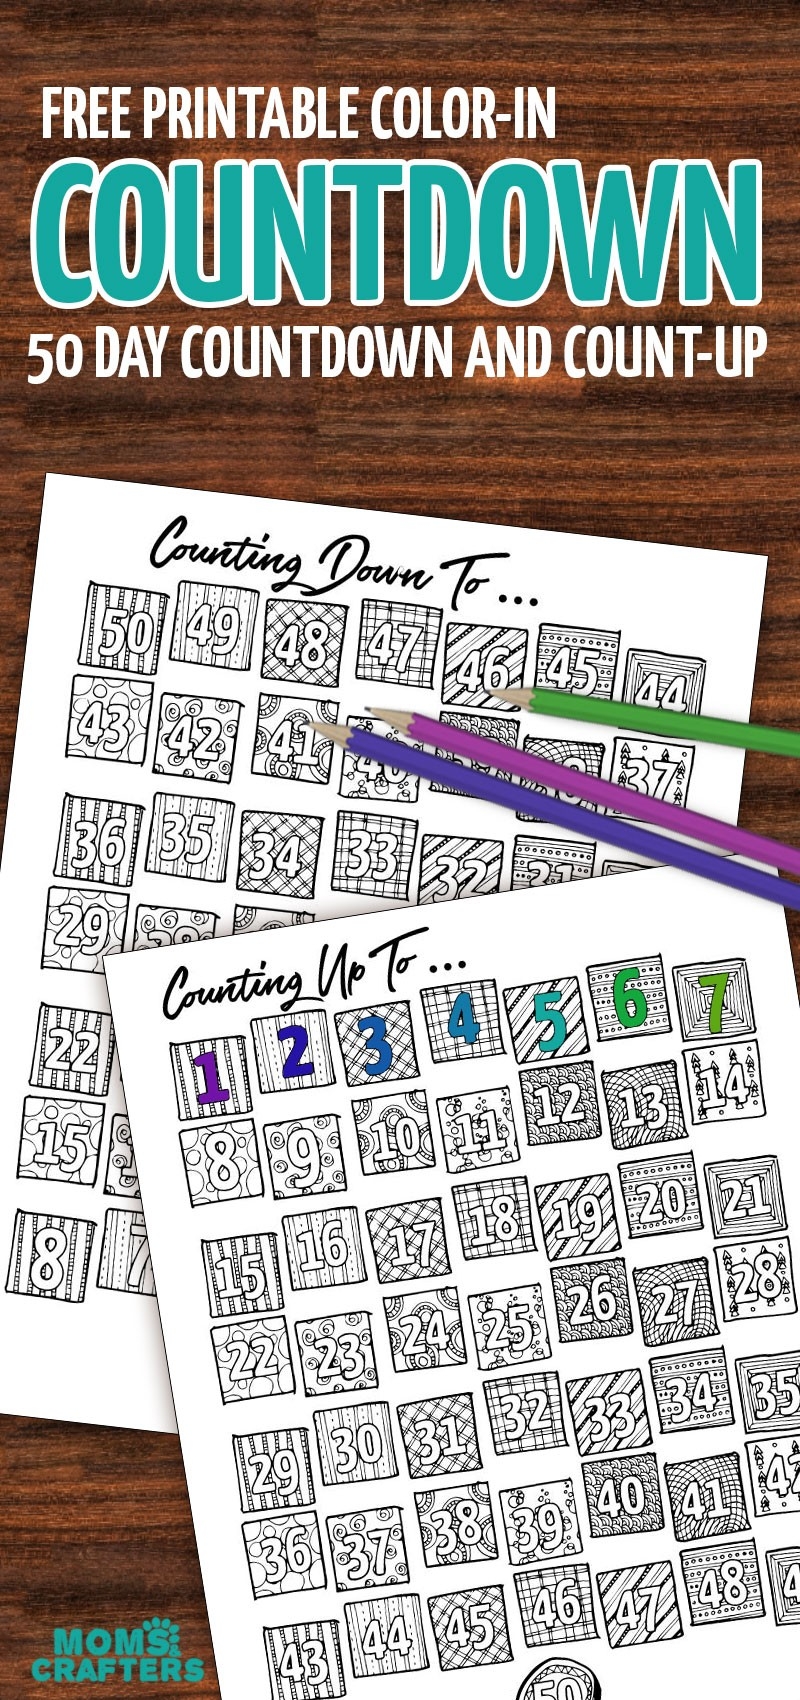 Printable Countdown Calendar And Progress Tracker - Color-In-Printable Coutndown Days Template